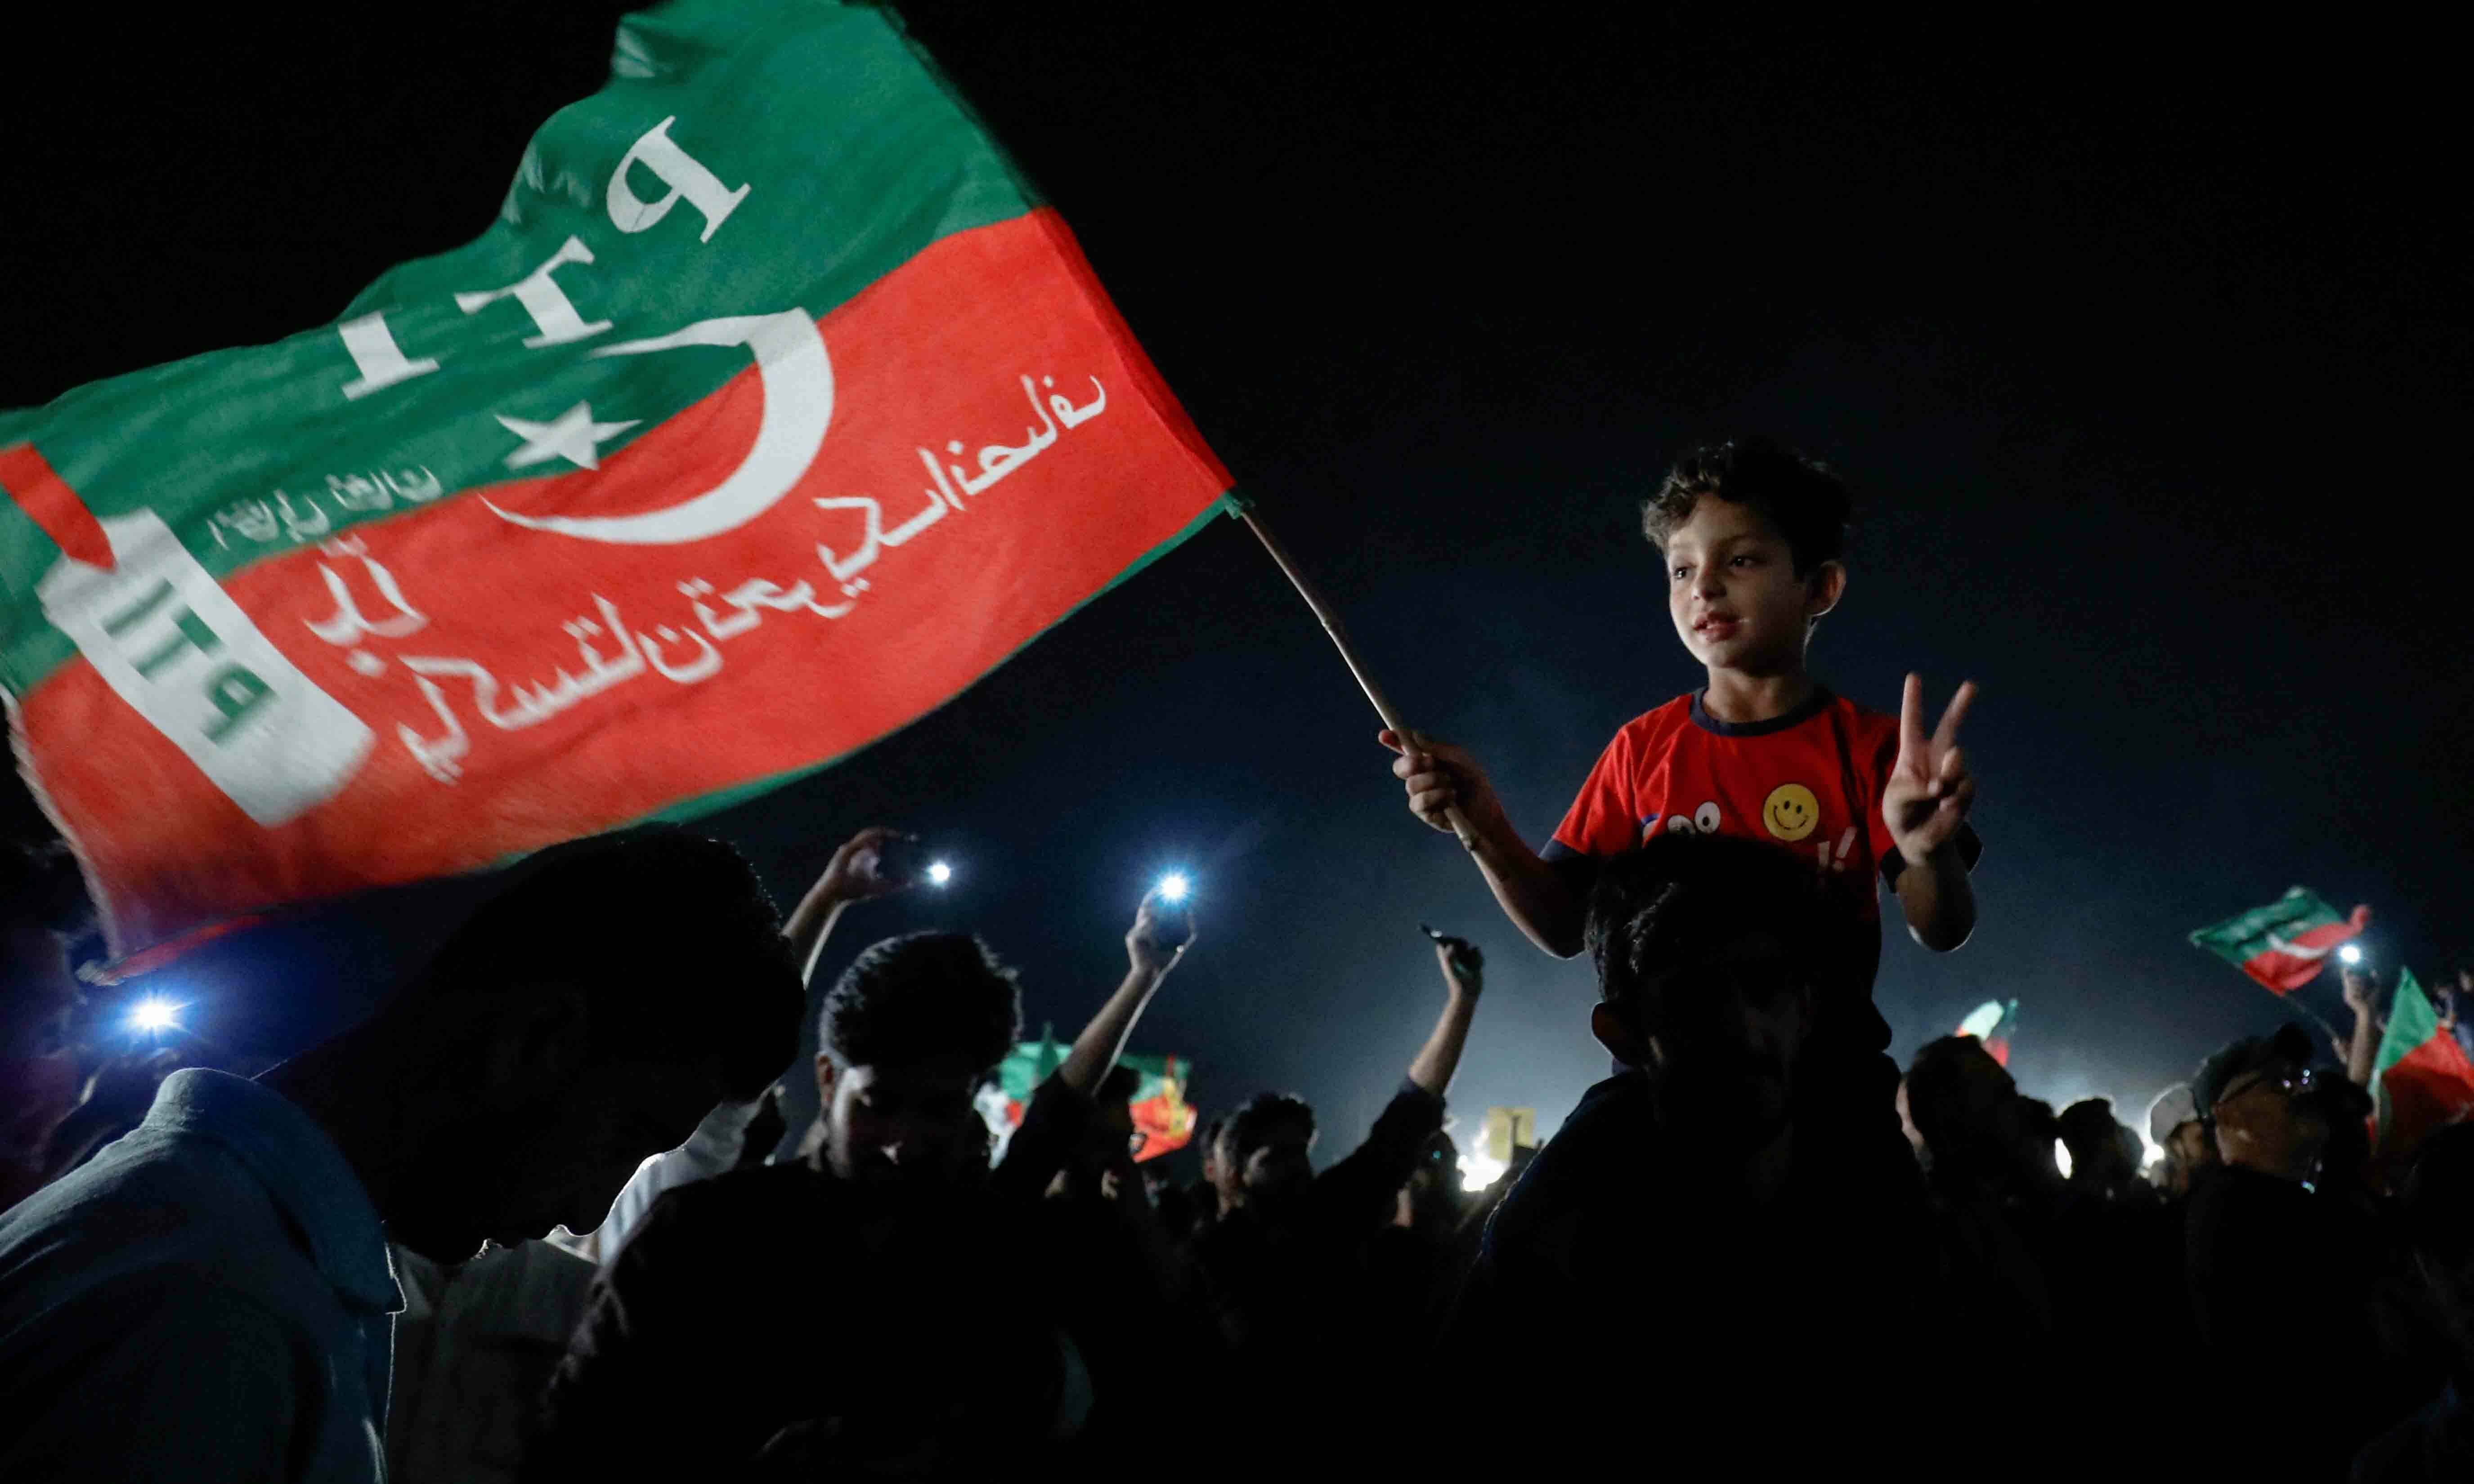 A child waves a PTI flag and gestures during a rally in support of former prime minister Imran Khan in Islamabad on April 10. — Reuters